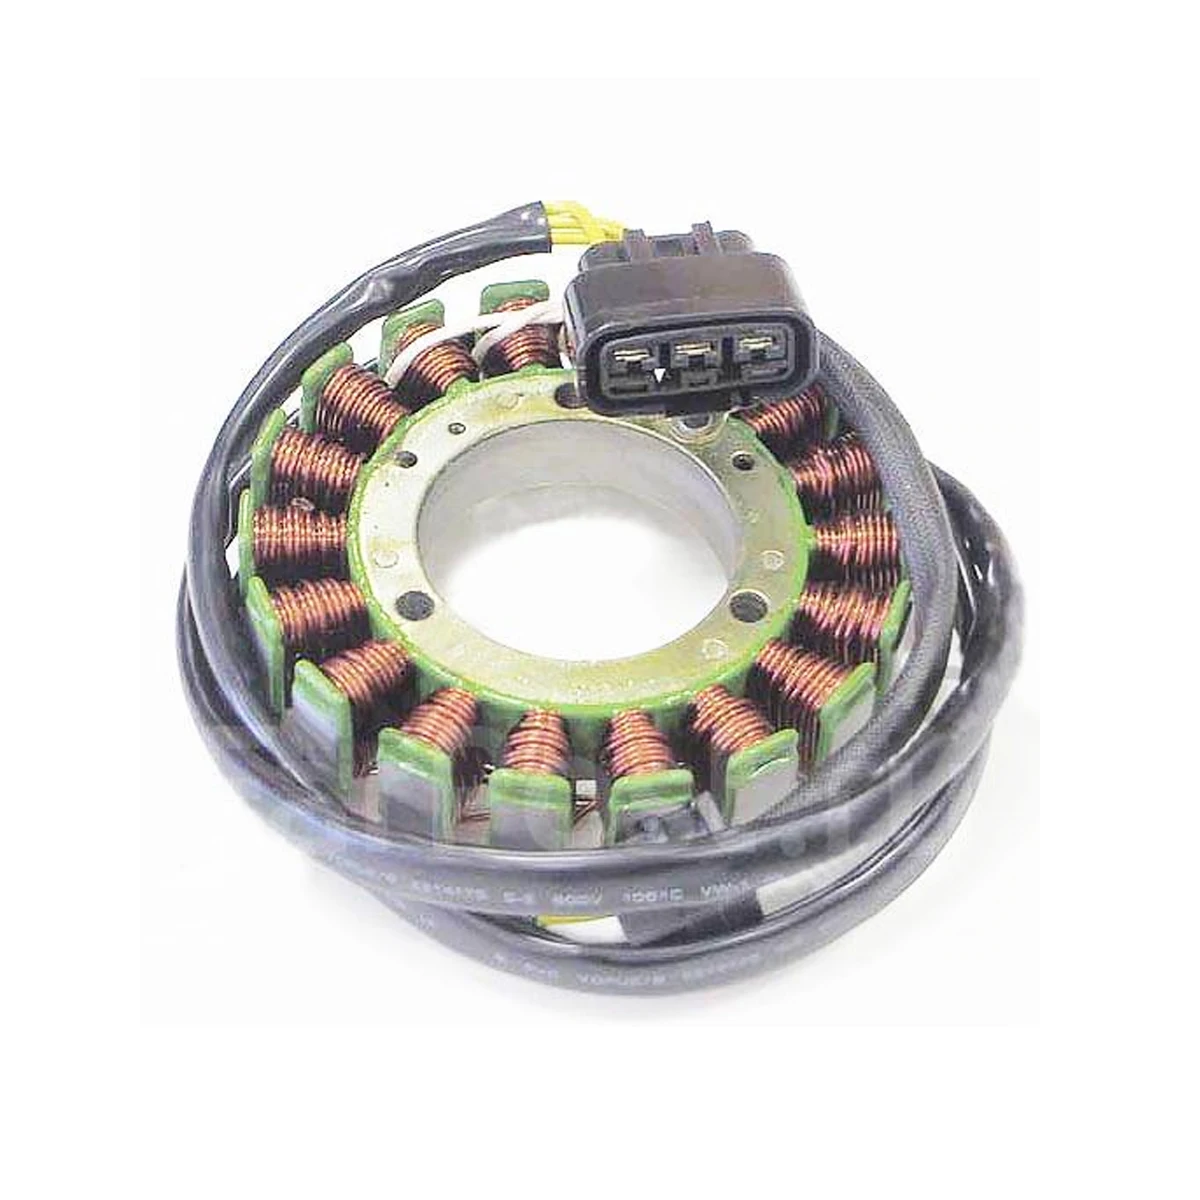 Magnetic Motor Stator For CF800  ZFORCE 800 Z8  go kart buggy Parts  0800-032000-2000 for 2000 2005 toyota estima central door lock motor for luxus locking kit engine auto parts